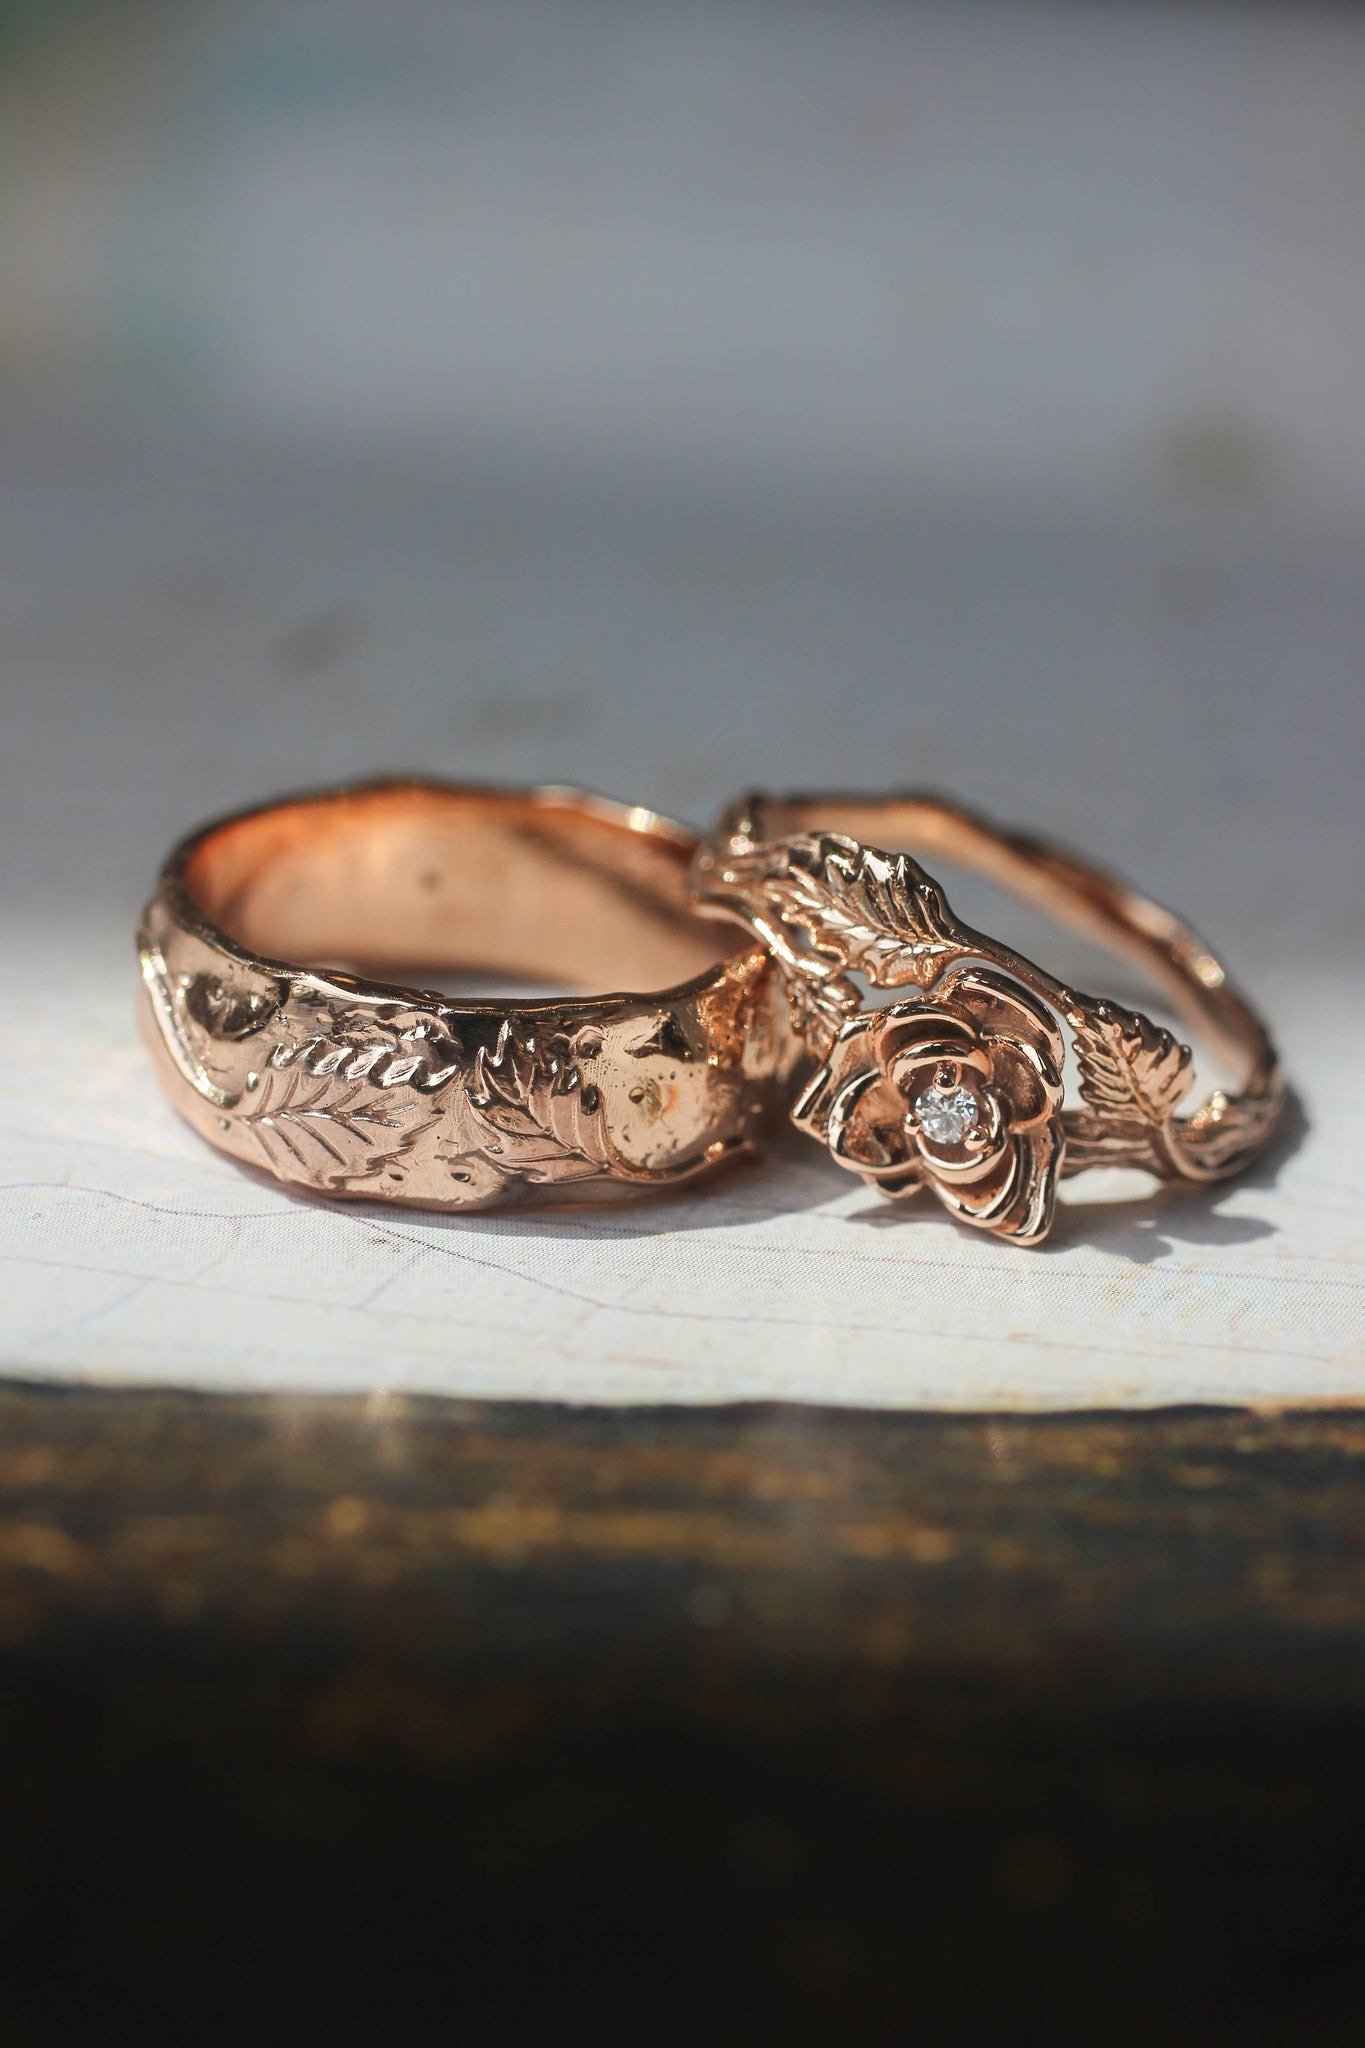 Textured ring with two leaves, man's wedding band - Eden Garden Jewelry™